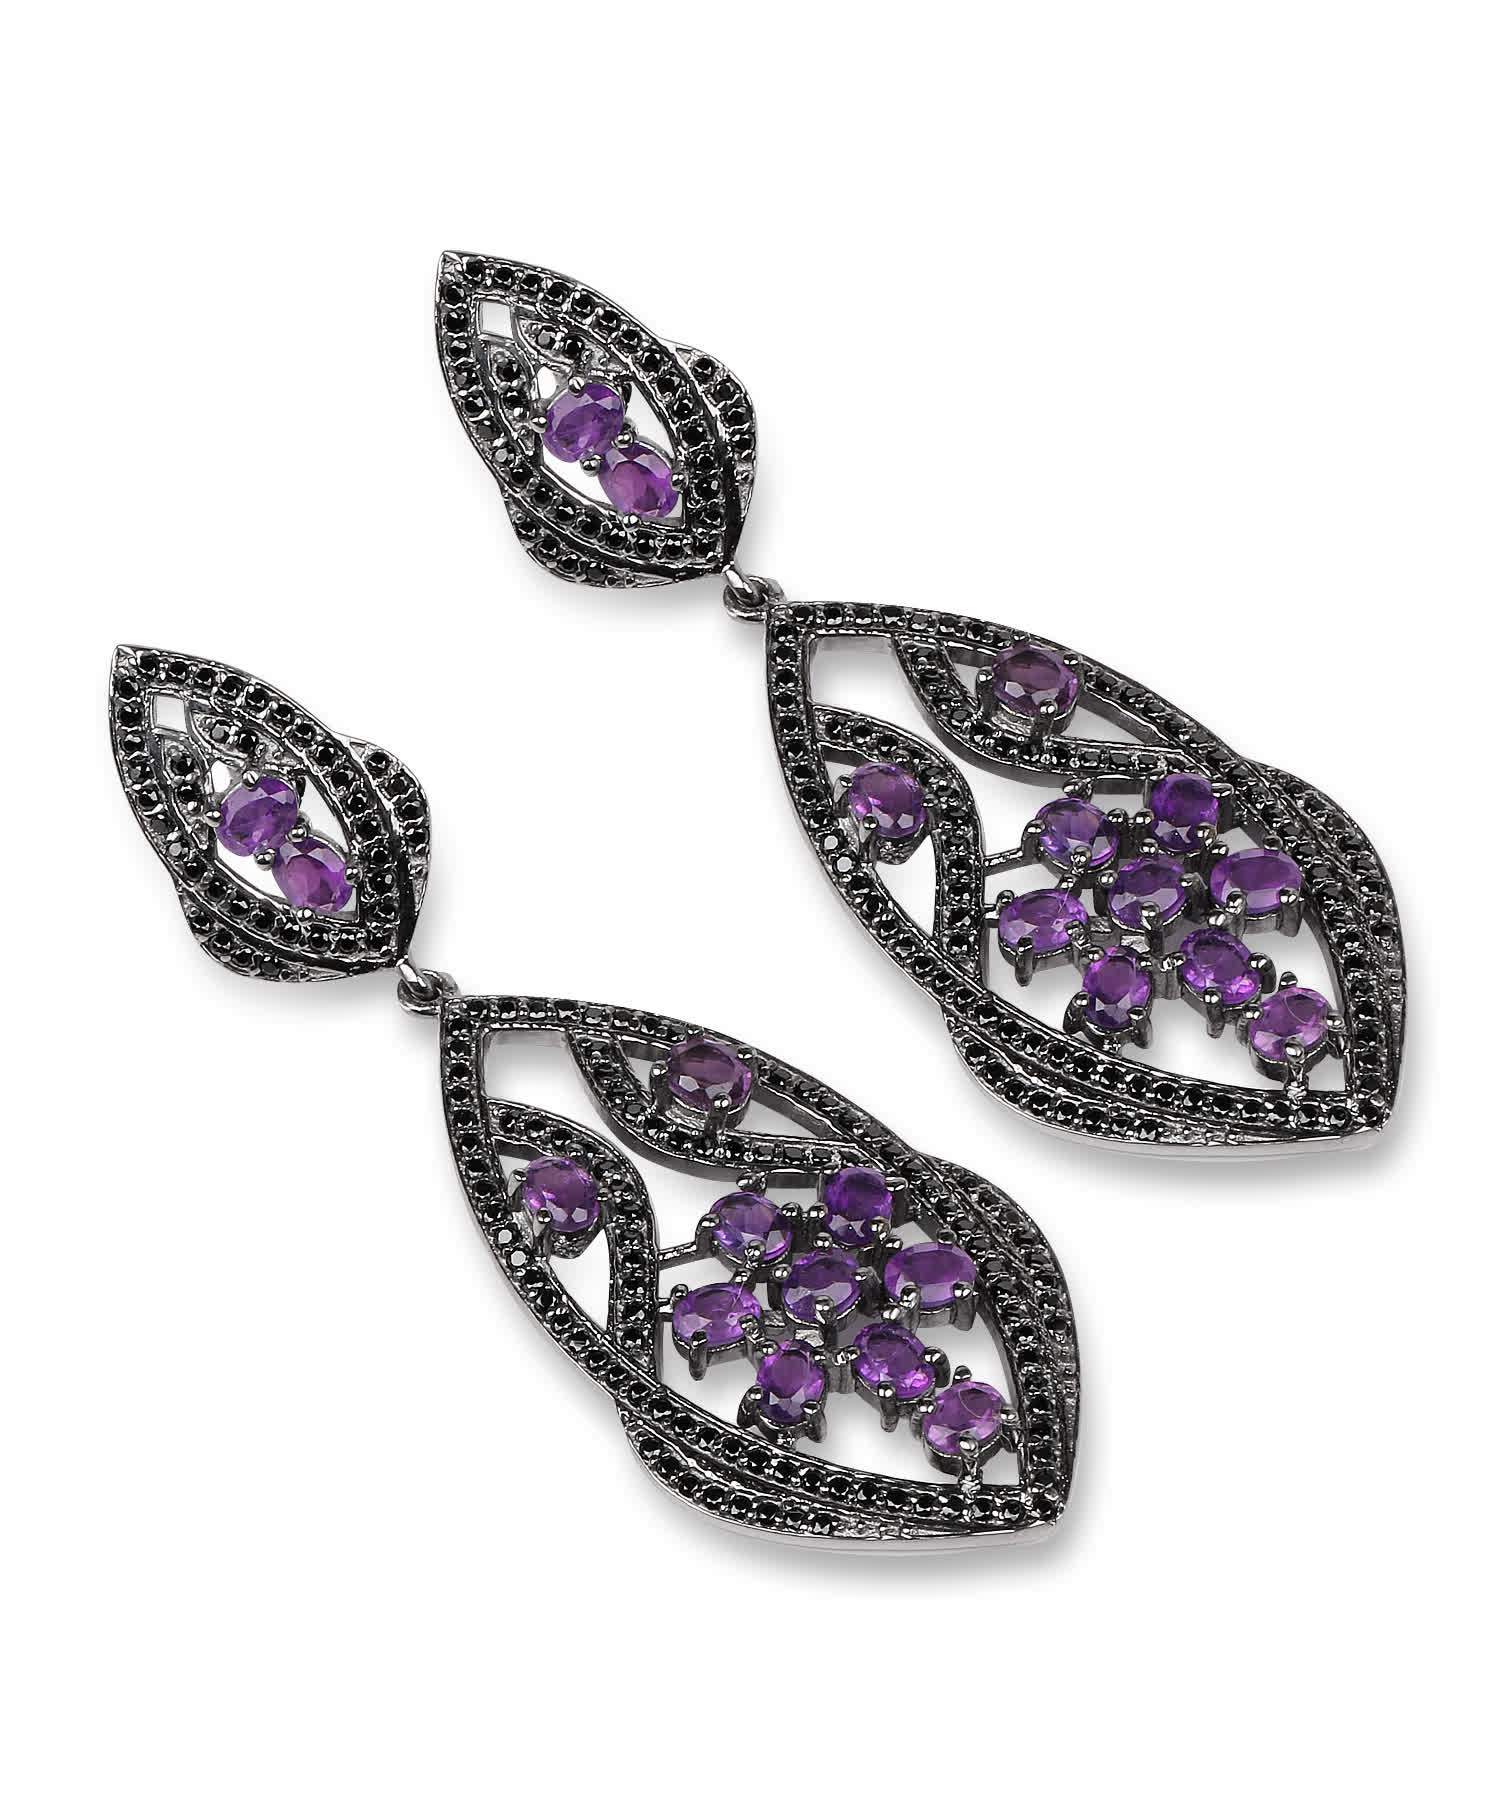 5.74ctw Natural Amethyst and Black Spinel Rhodium Plated 925 Sterling Silver Antique Style Dangle Earrings View 3